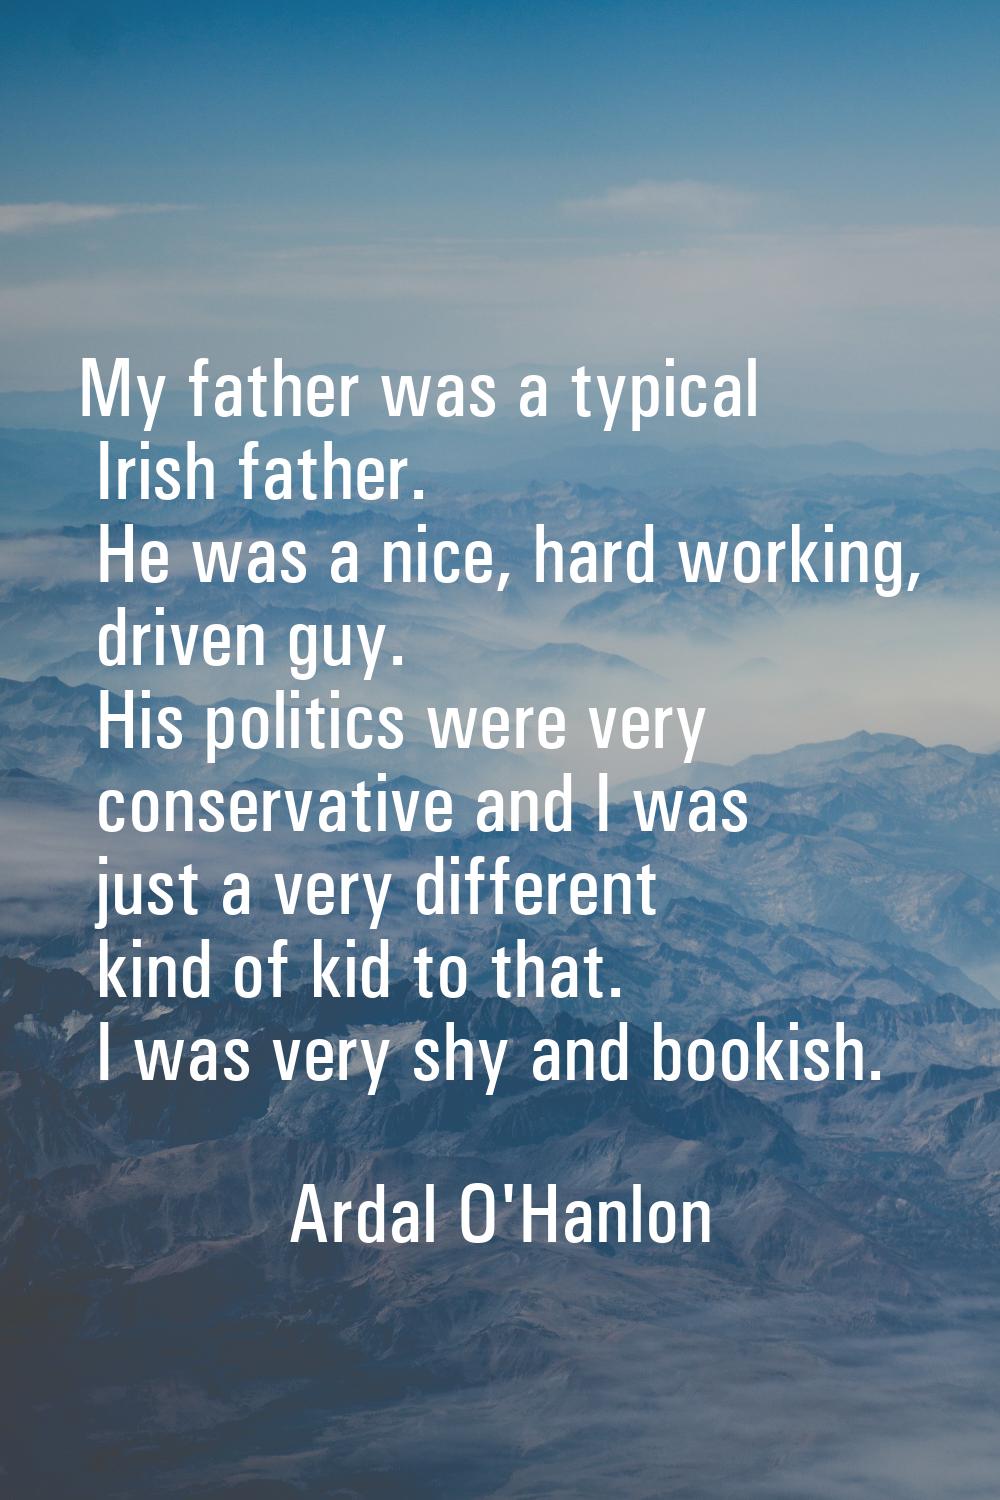 My father was a typical Irish father. He was a nice, hard working, driven guy. His politics were ve